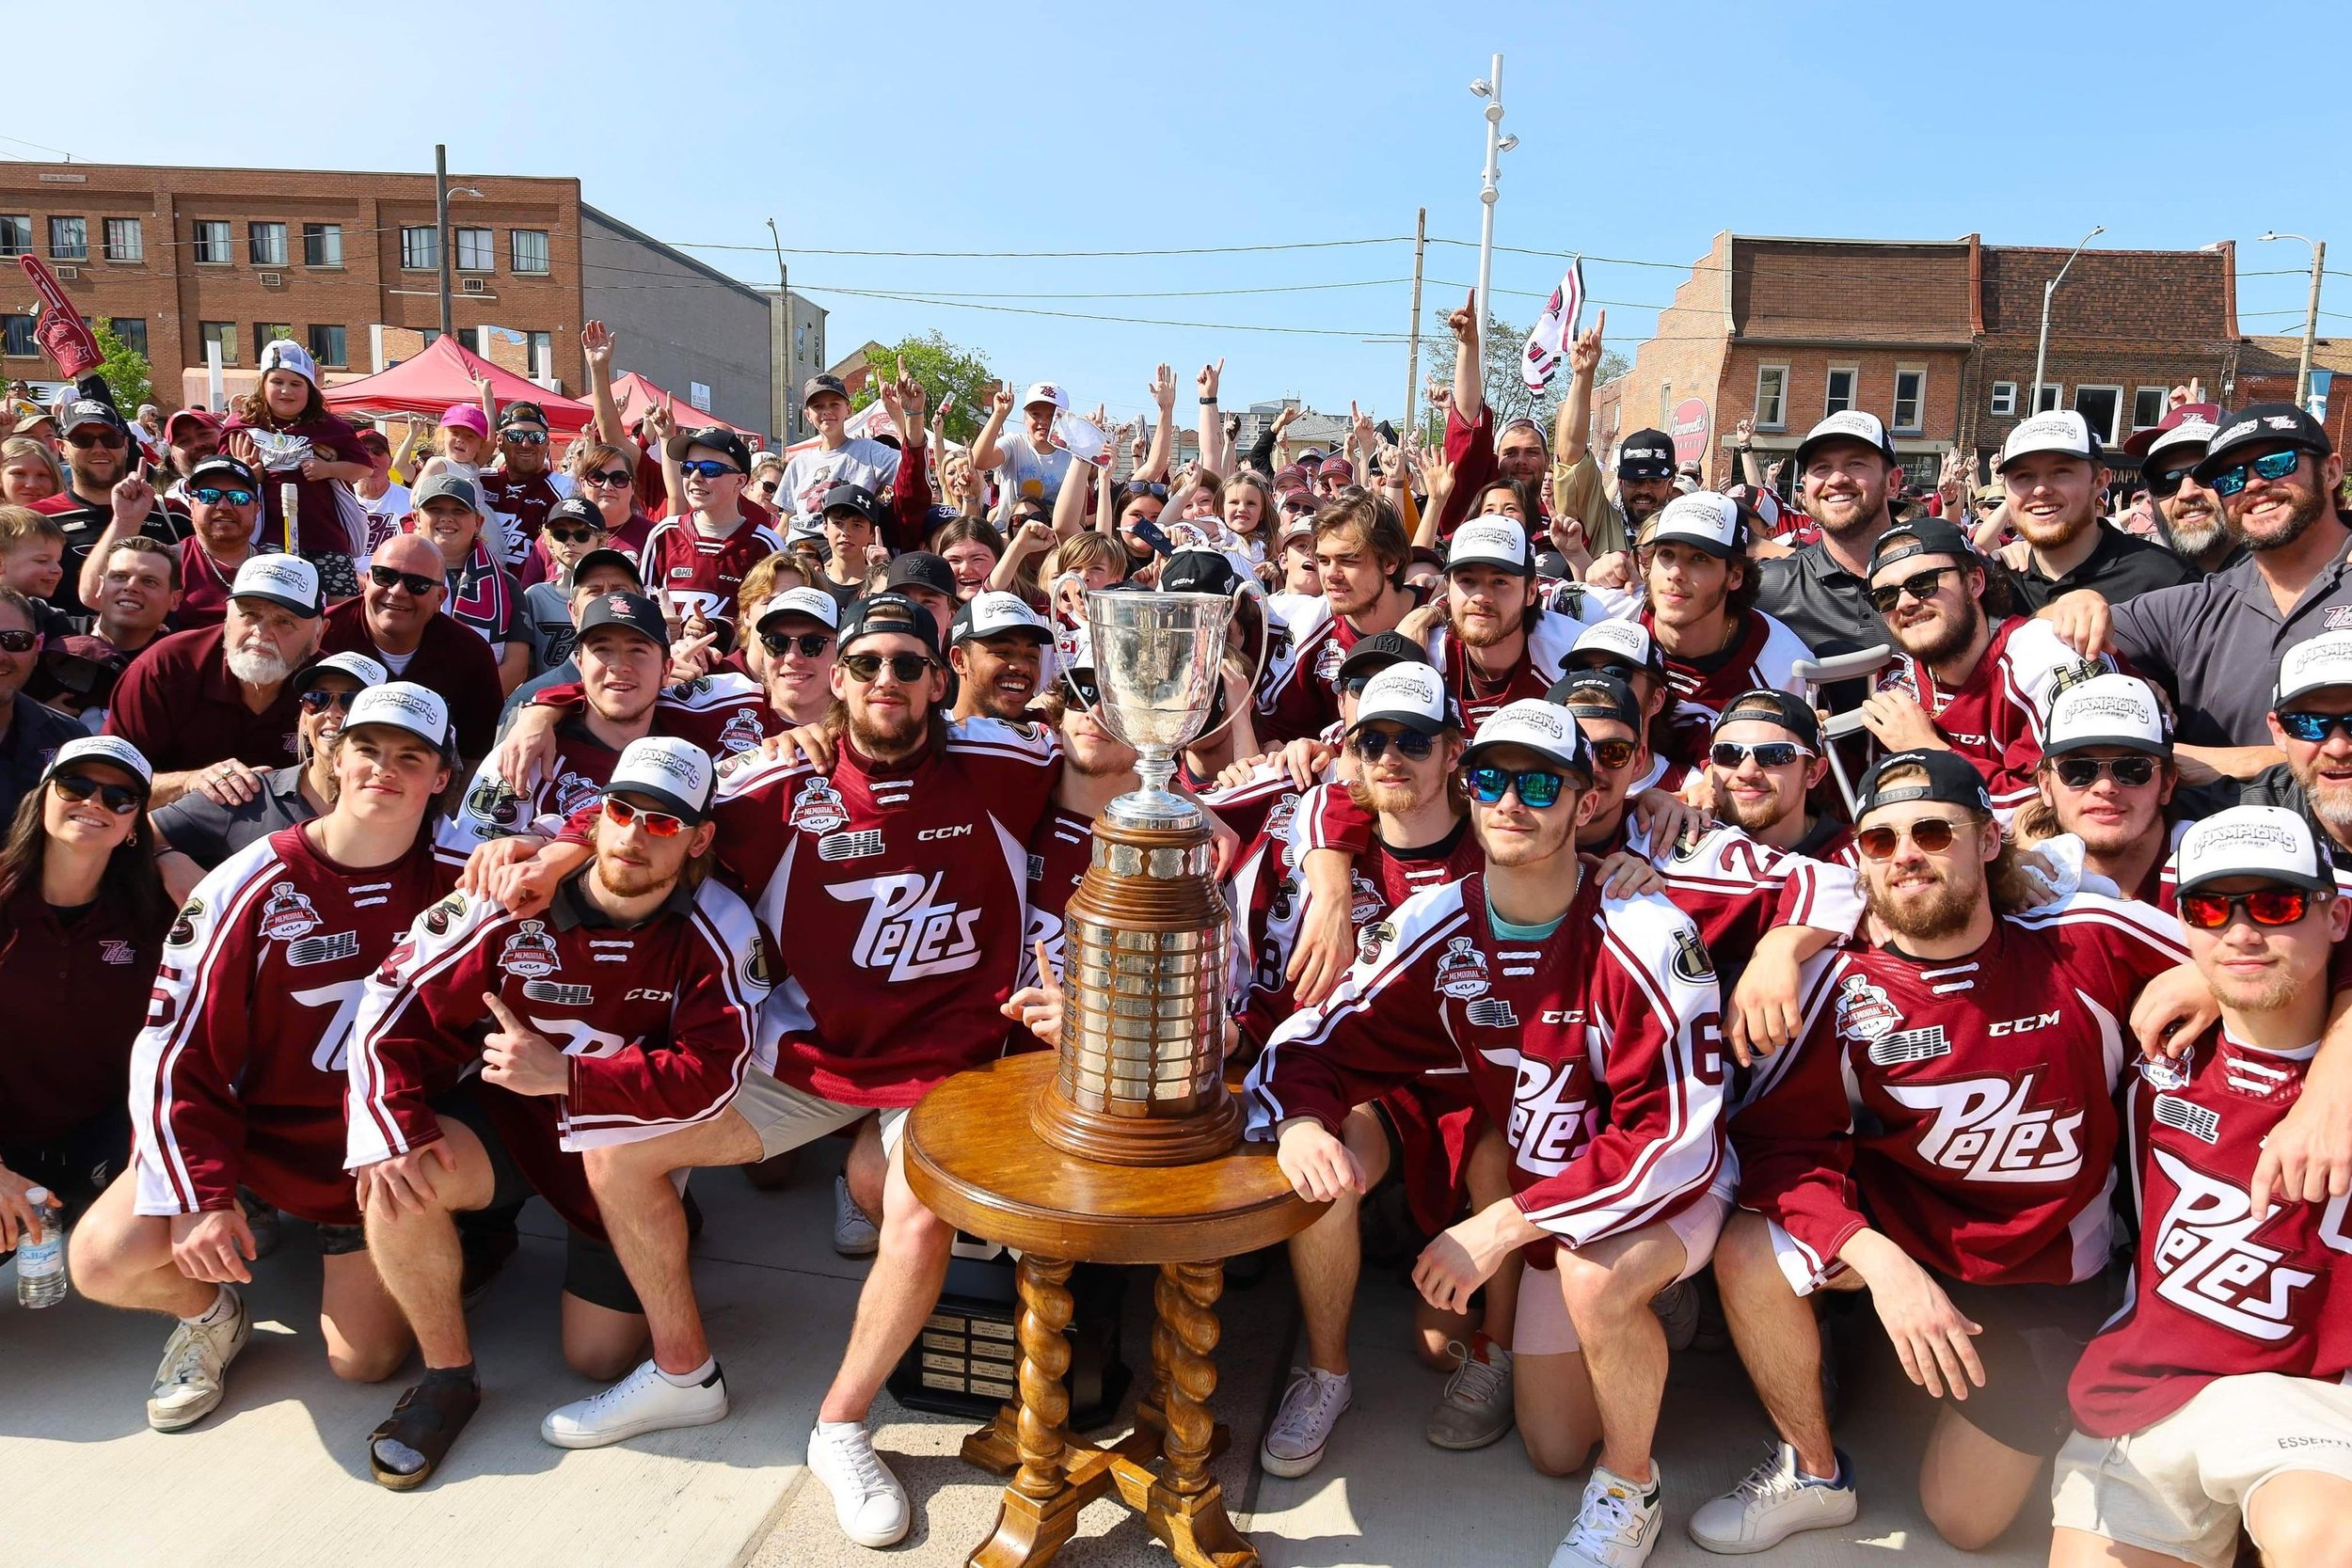 A Petes watch party took place at the Quaker Food Park Square during the team's last playoff road game on Friday. All photos by Samantha Bianco.